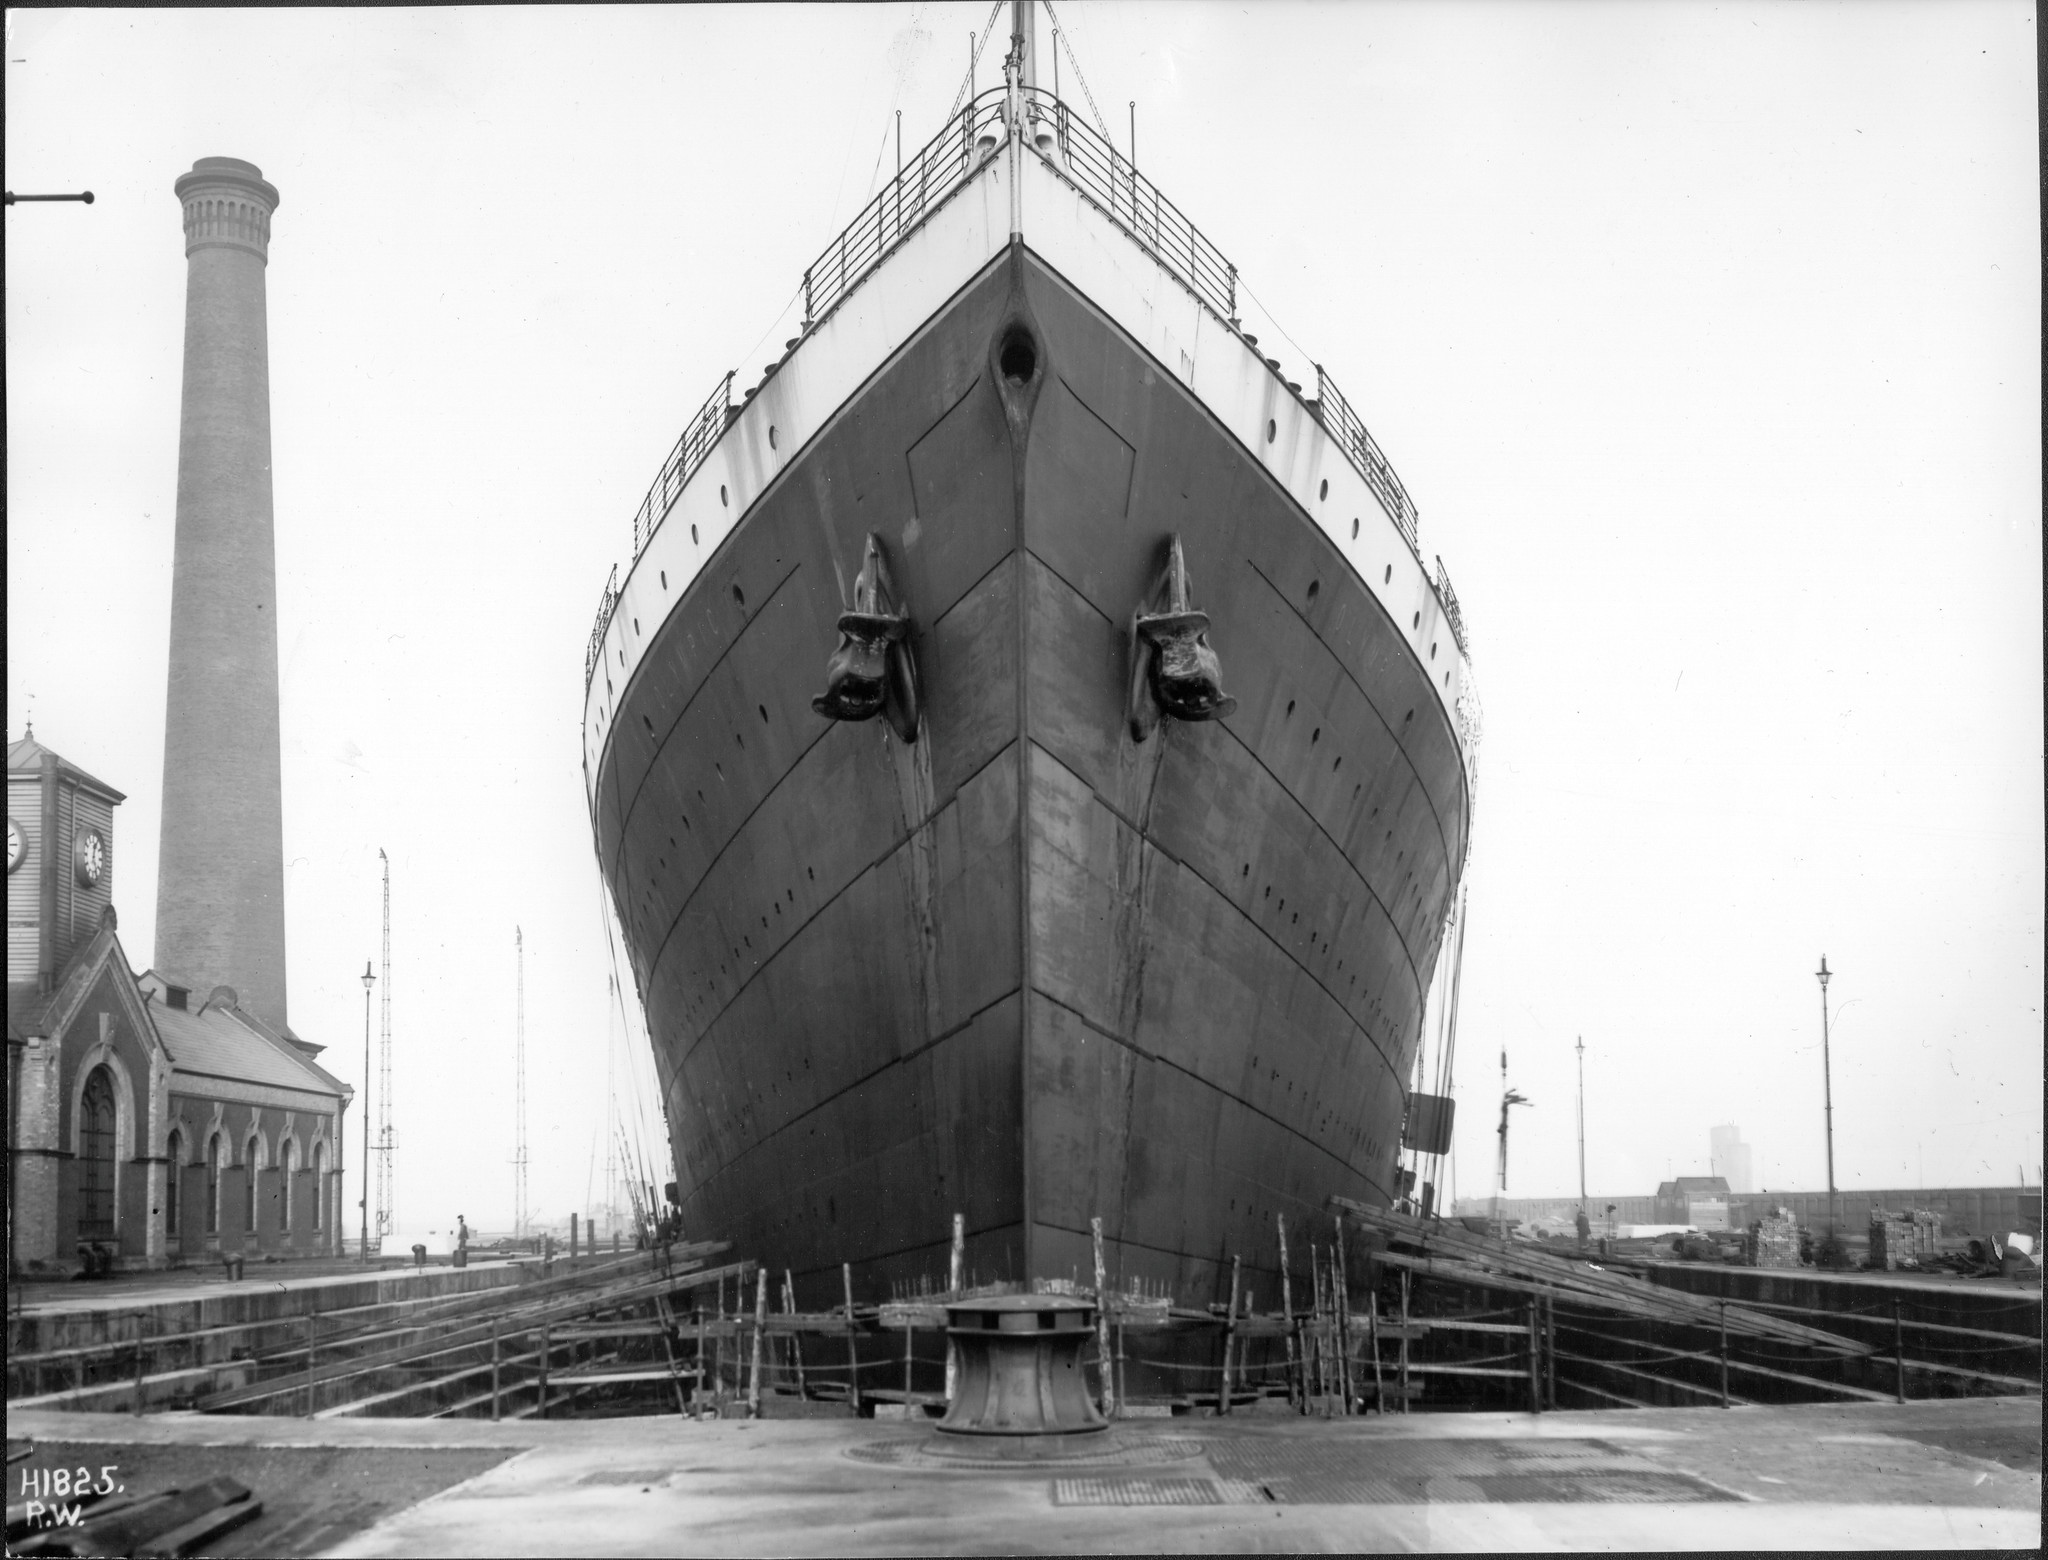 General 2048x1560 RMS Olympic liner dock monochrome ship old photos